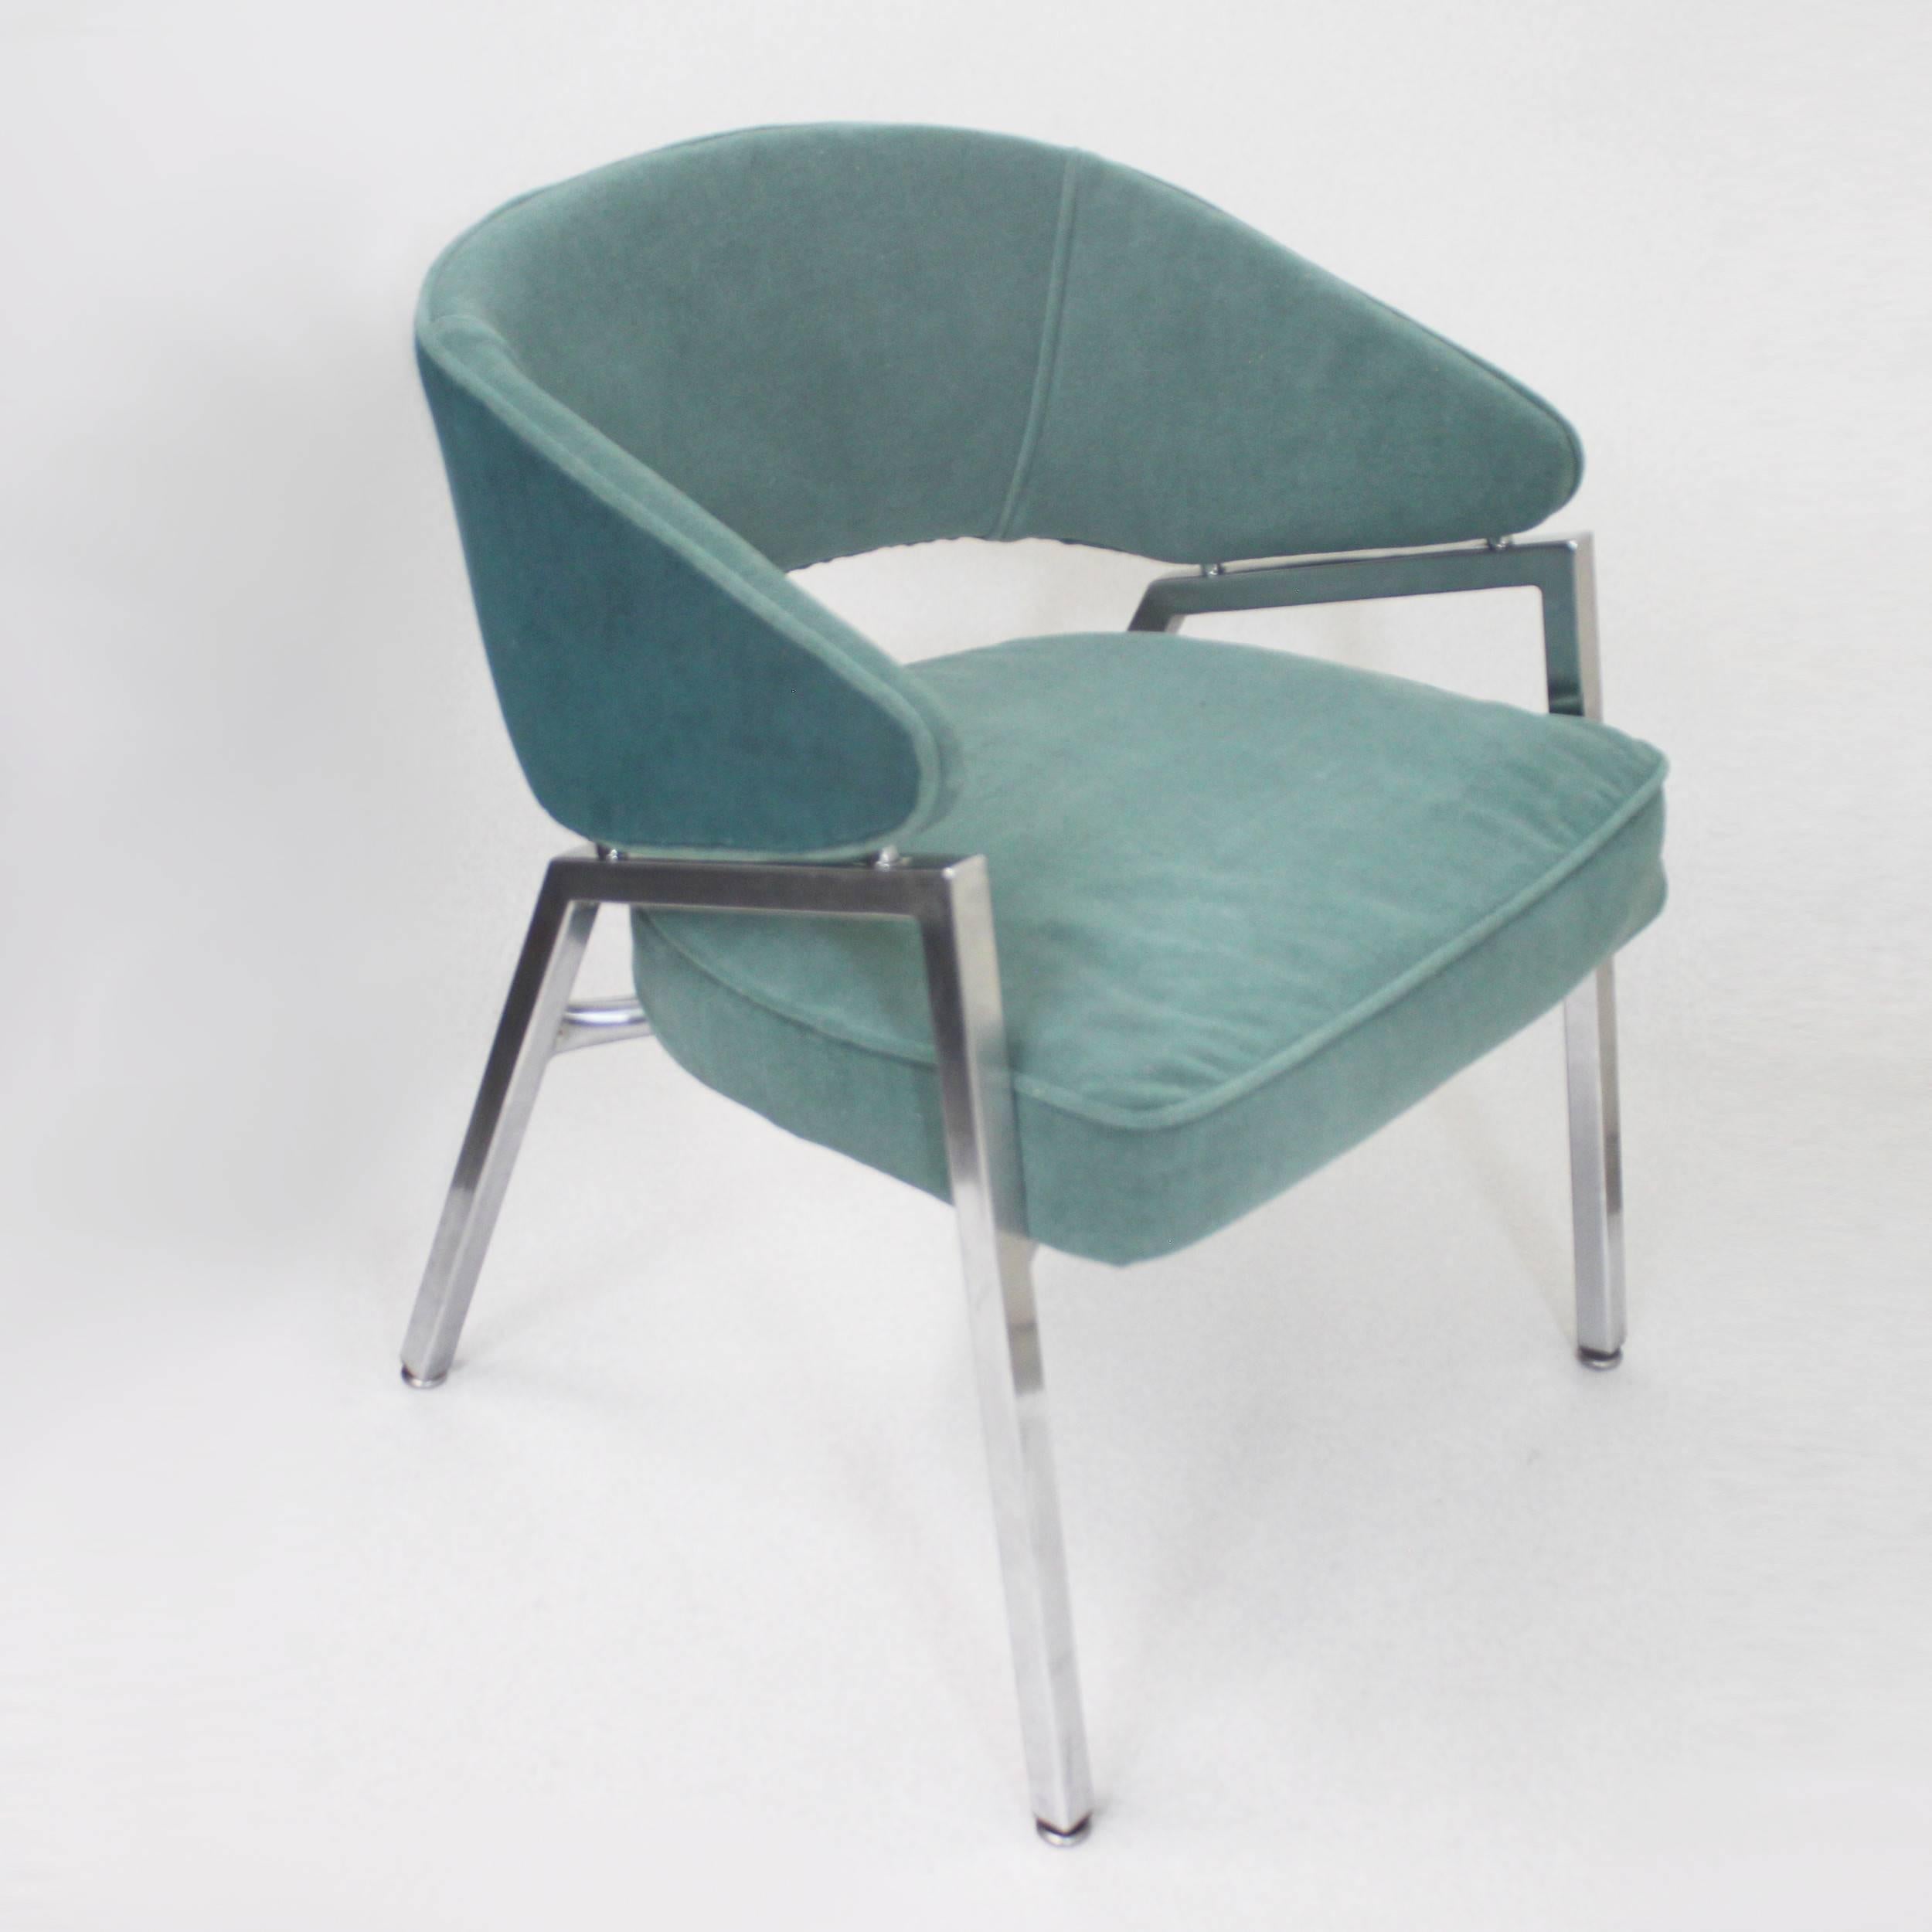 Rare Pair of 1970s Mid-Century Modern Teal Green and Chrome Side Armchairs 1